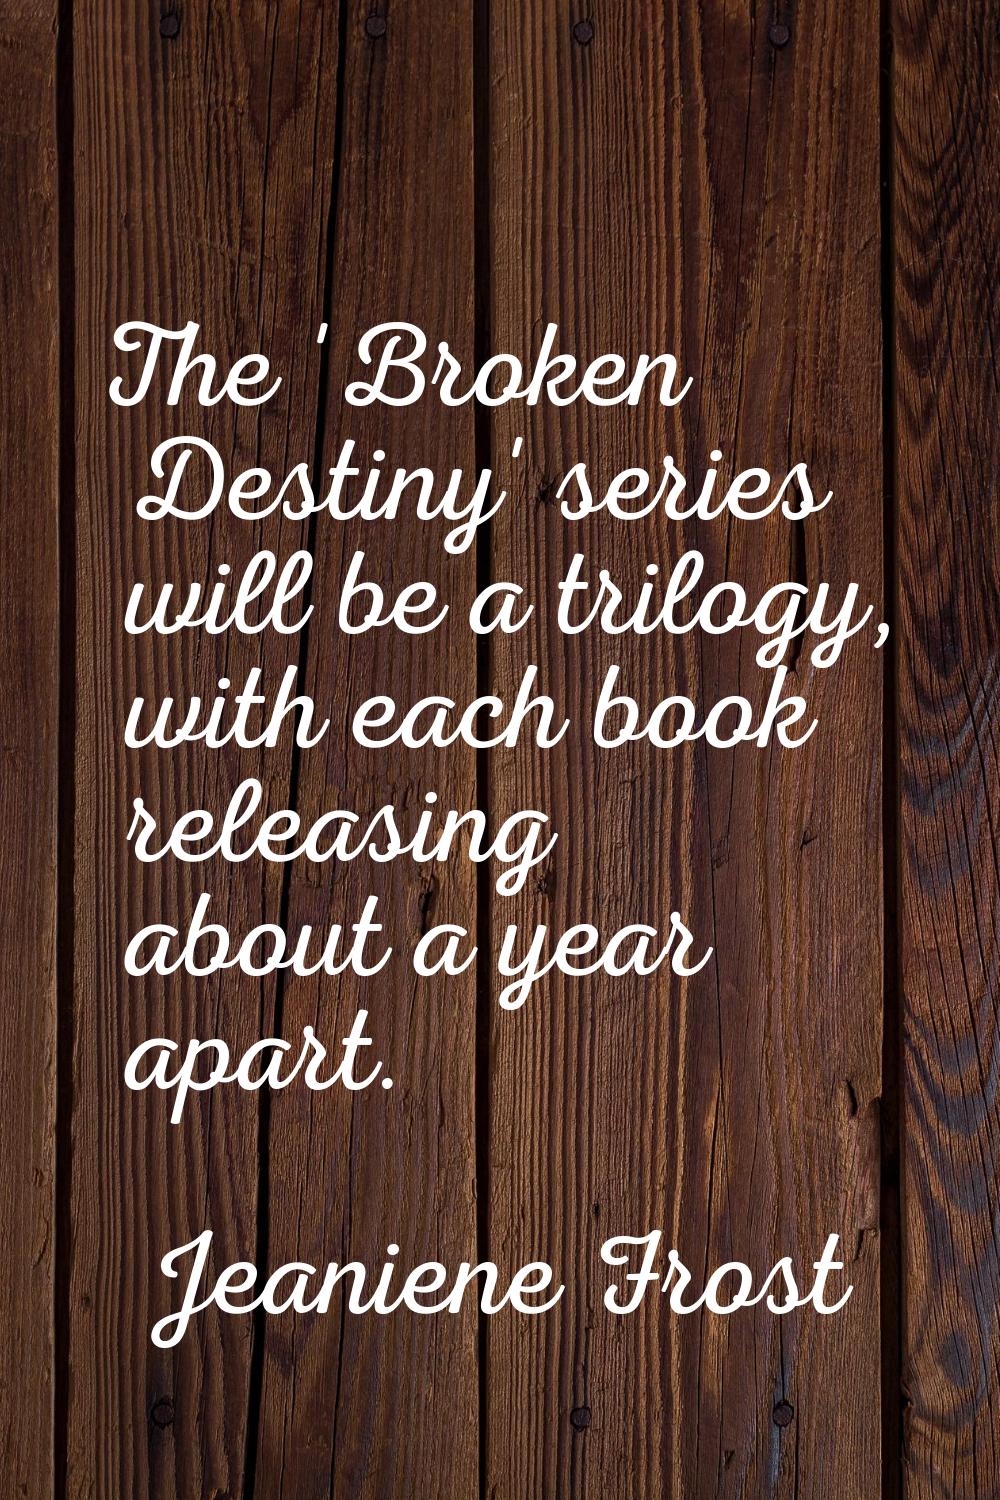 The 'Broken Destiny' series will be a trilogy, with each book releasing about a year apart.